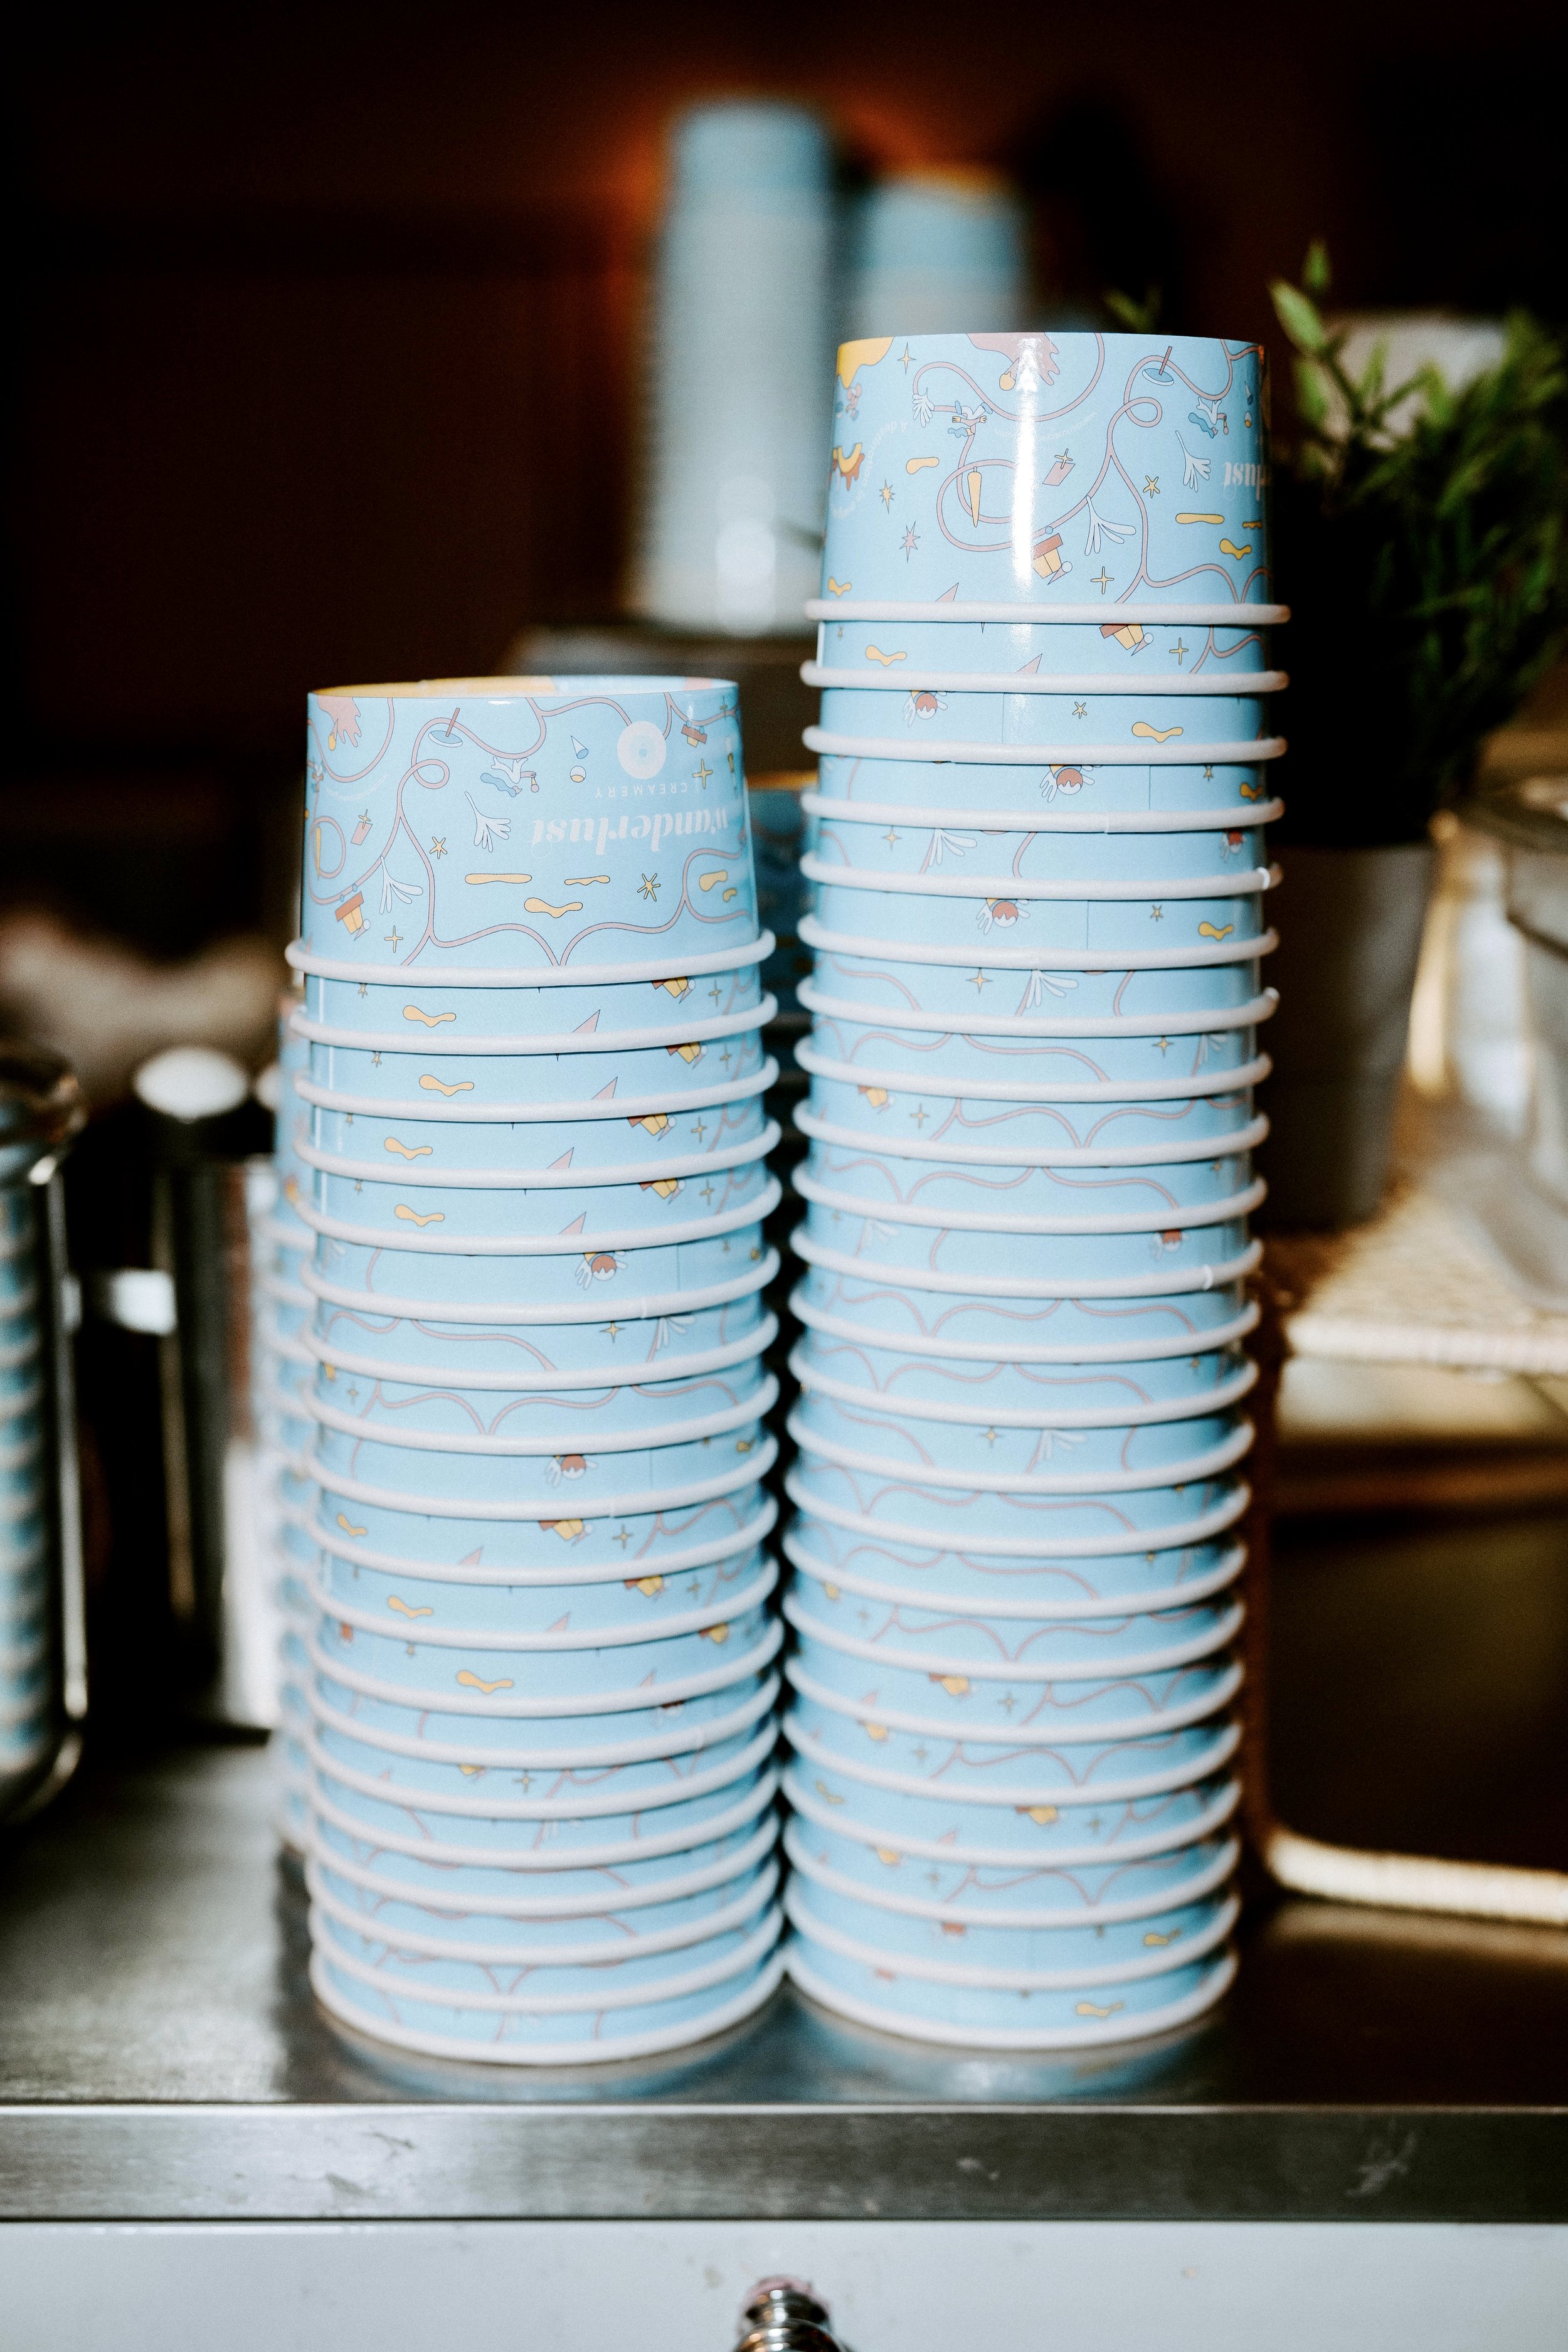 Our branded cups are provided at every event!